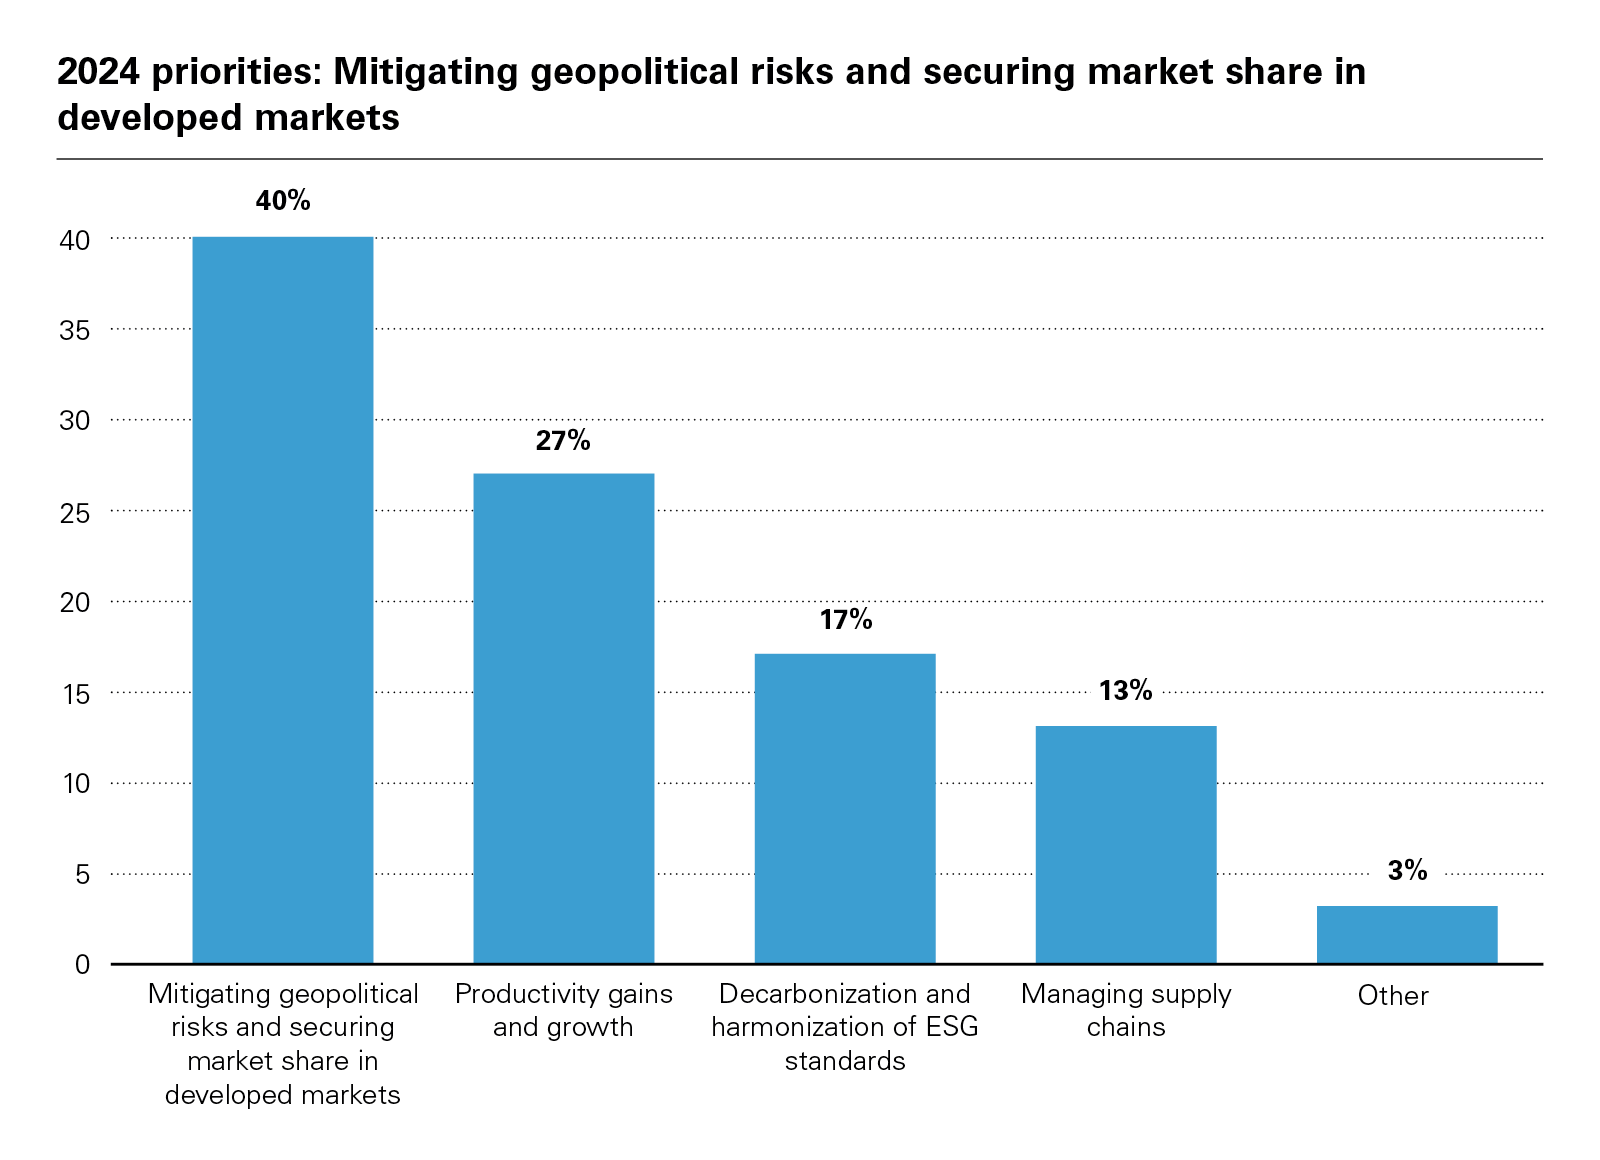 2024 priorities: Mitigating geopolitical risks and securing market share in developed markets